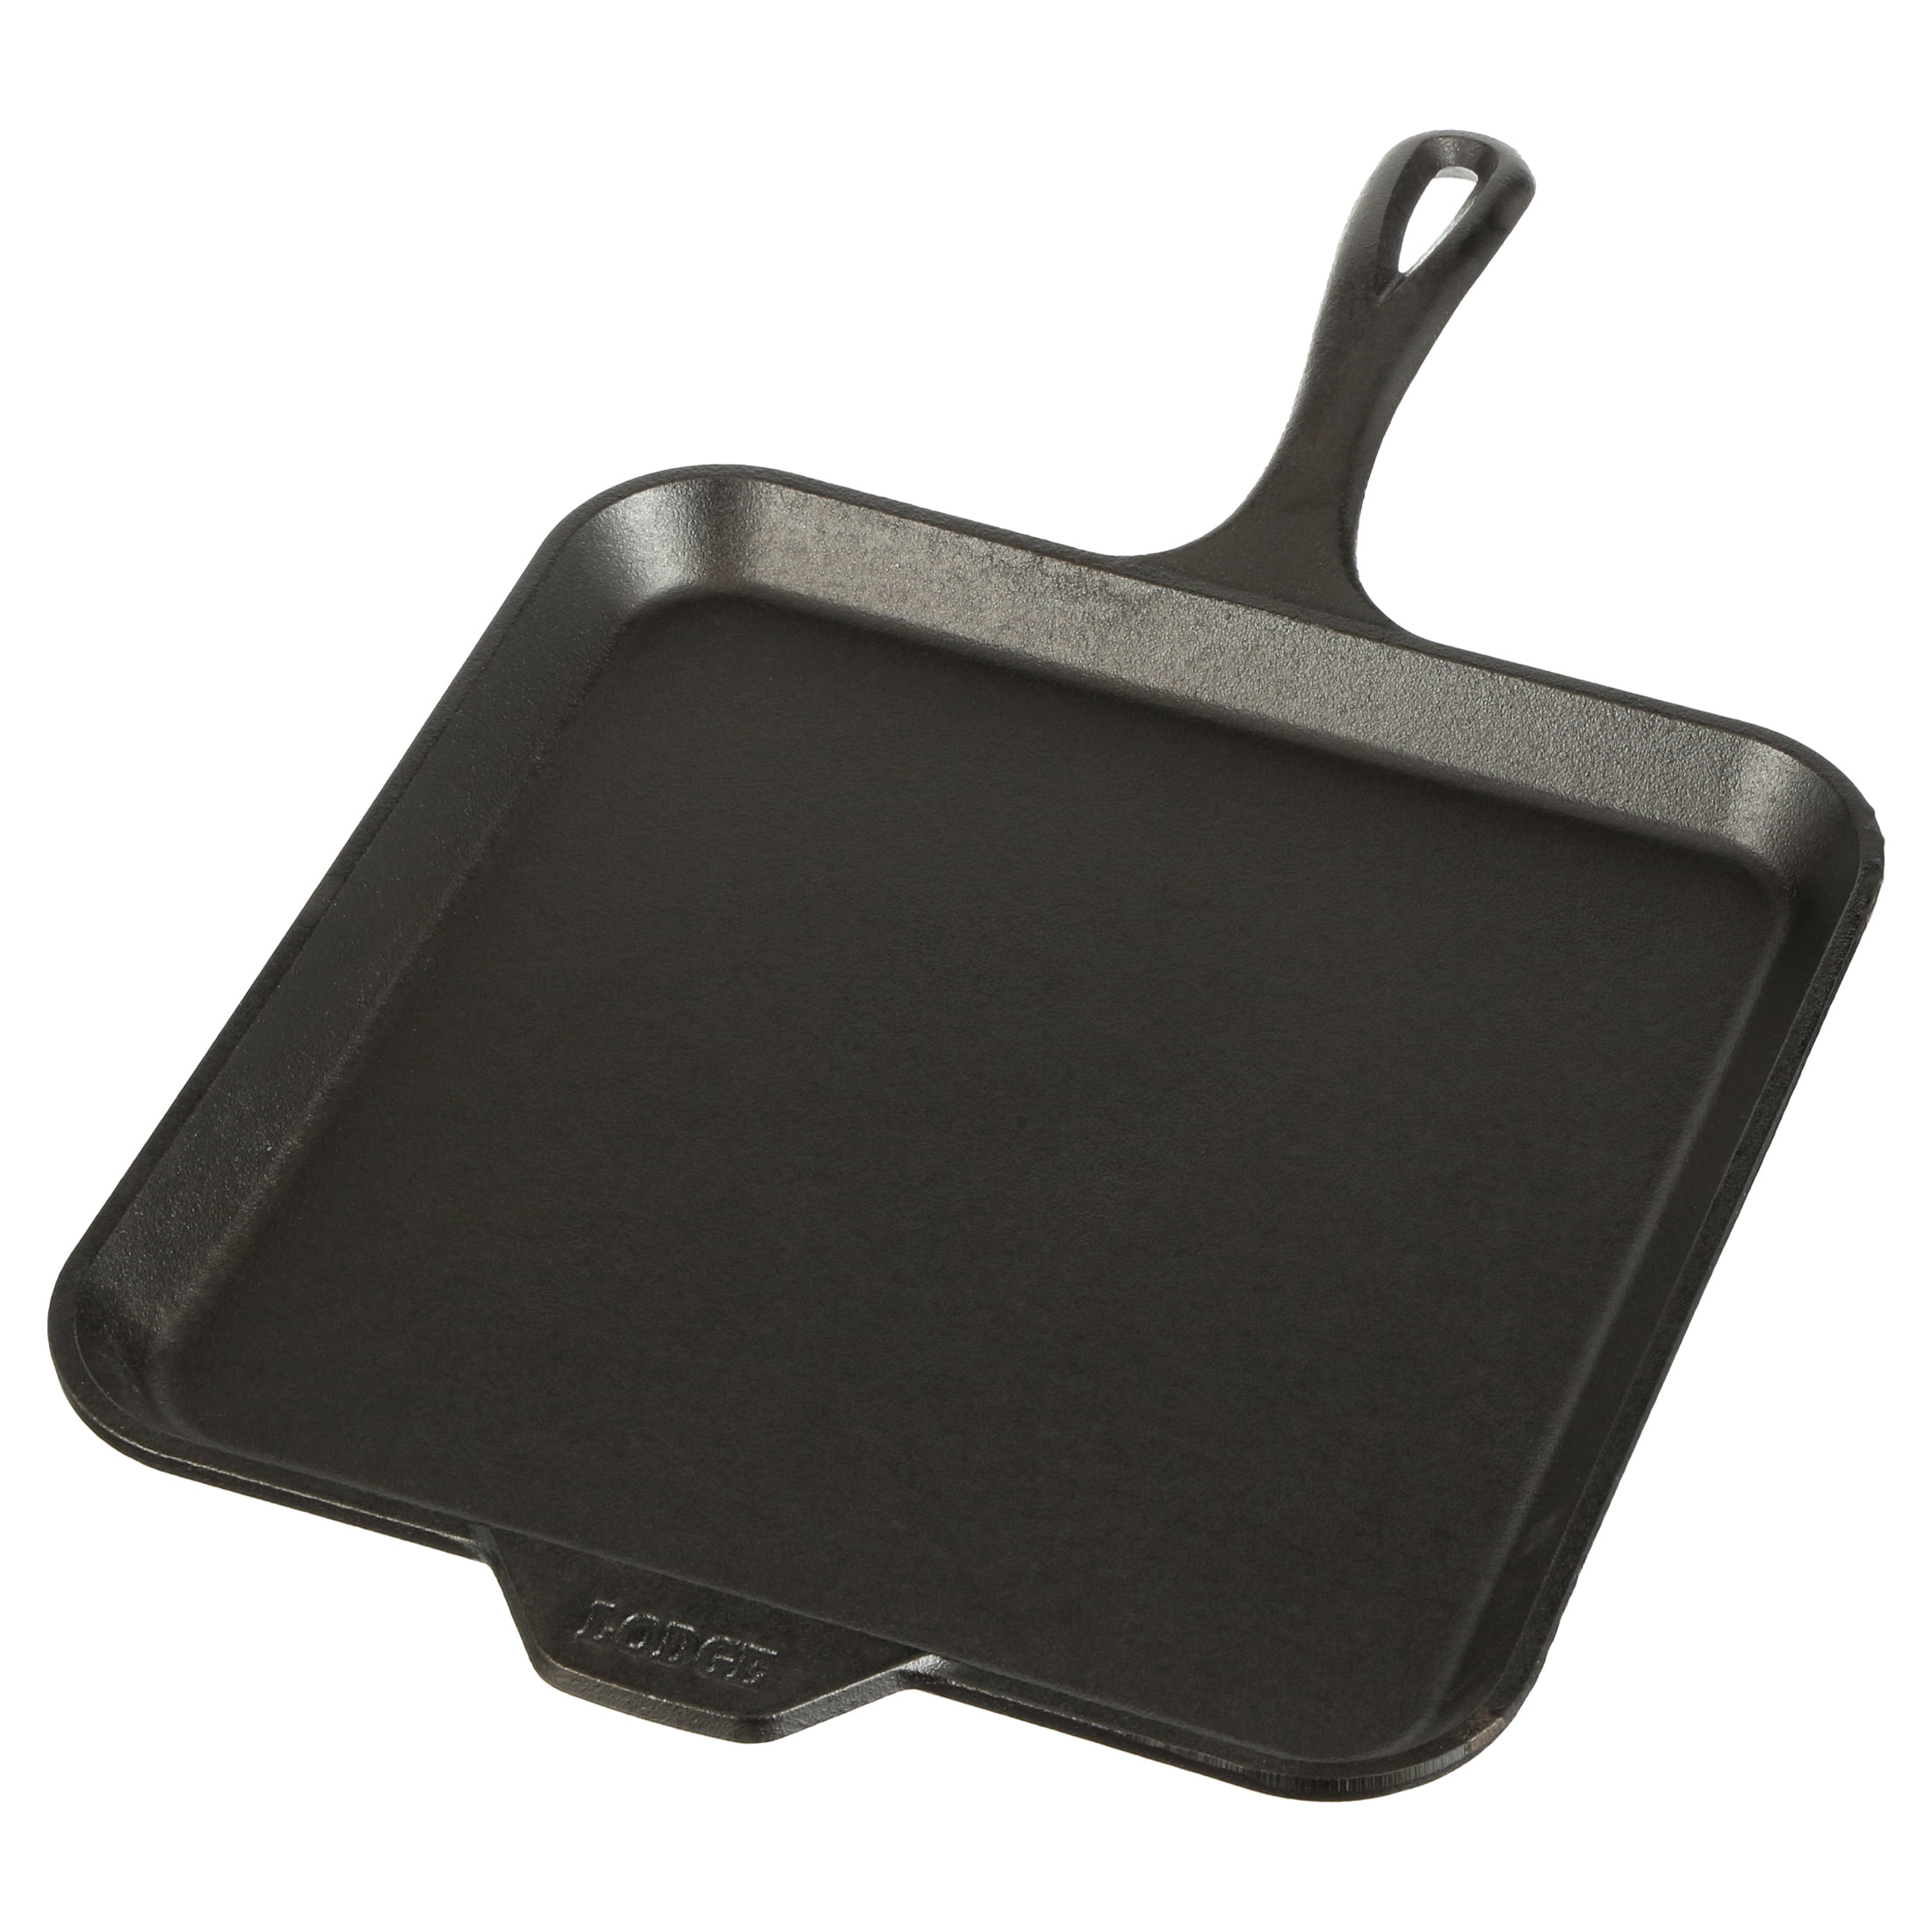 Lodge Seasoned Square Cast Iron Grill Pan - Shop Frying Pans & Griddles at  H-E-B